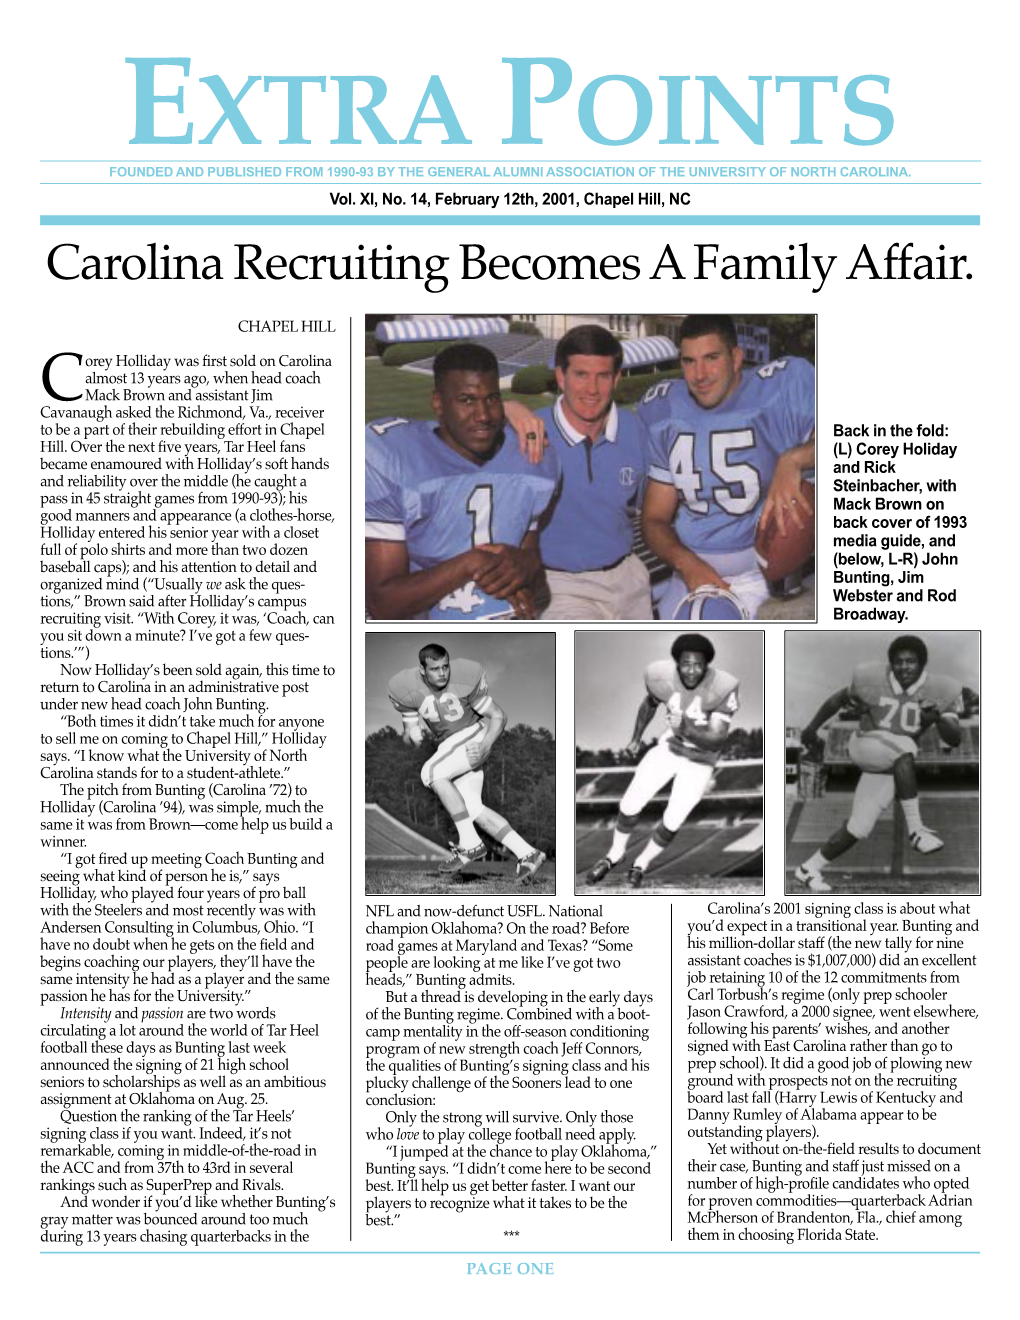 Extra Points Founded and Published from 1990-93 by the General Alumni Association of the University of North Carolina